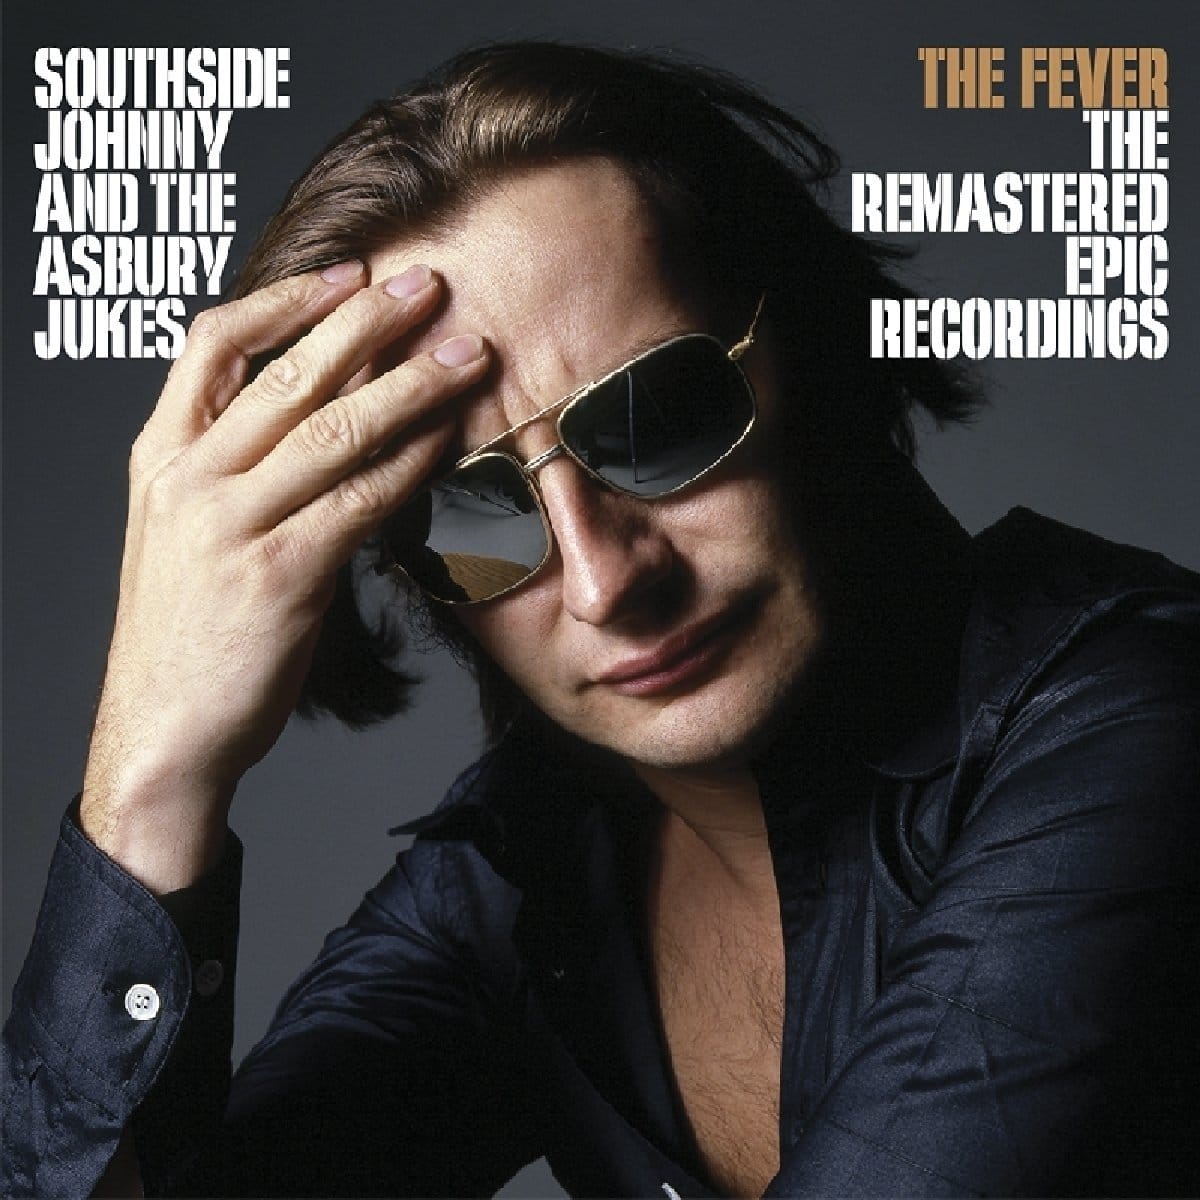 Southside Johnny & the Asbury Jukes: The Fever/The Remastered Epic Recordings